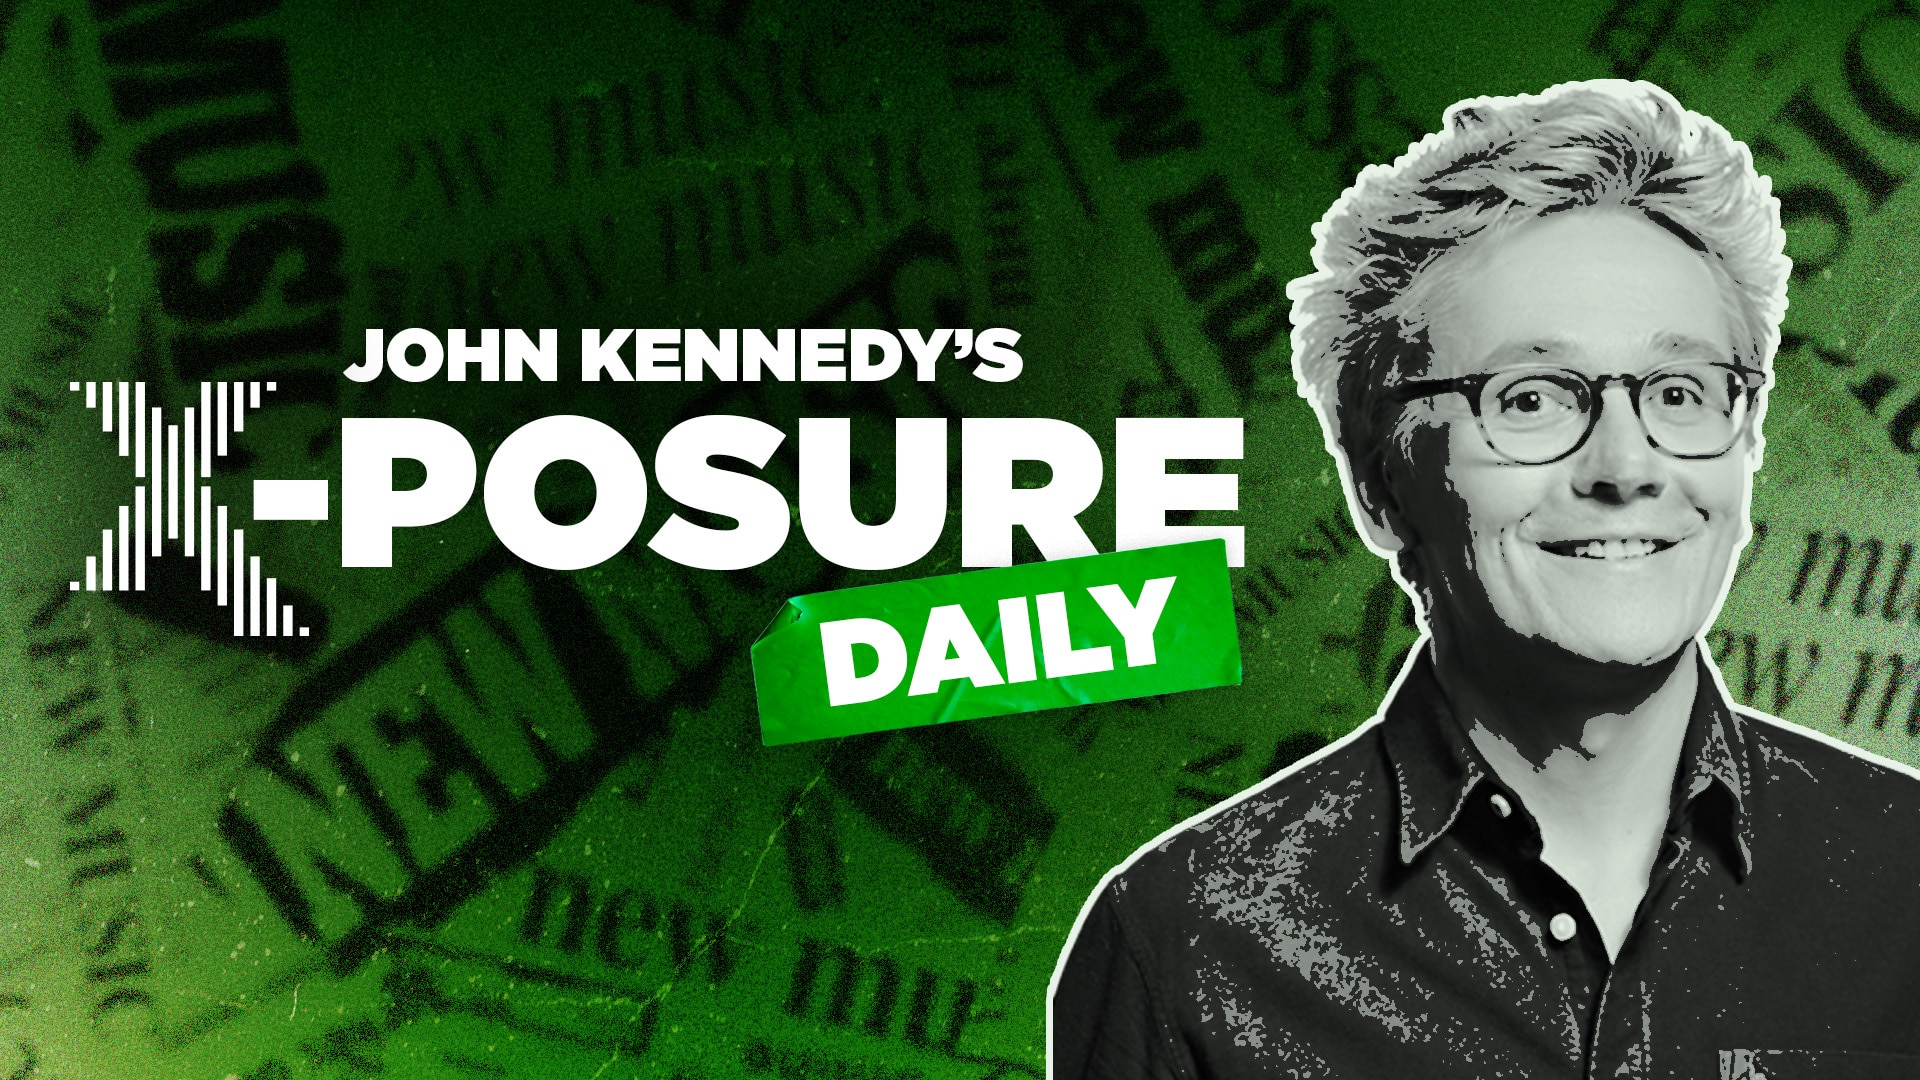 Radio X presents X-Posure Daily the first On Demand show exclusive to Global Player TODAY